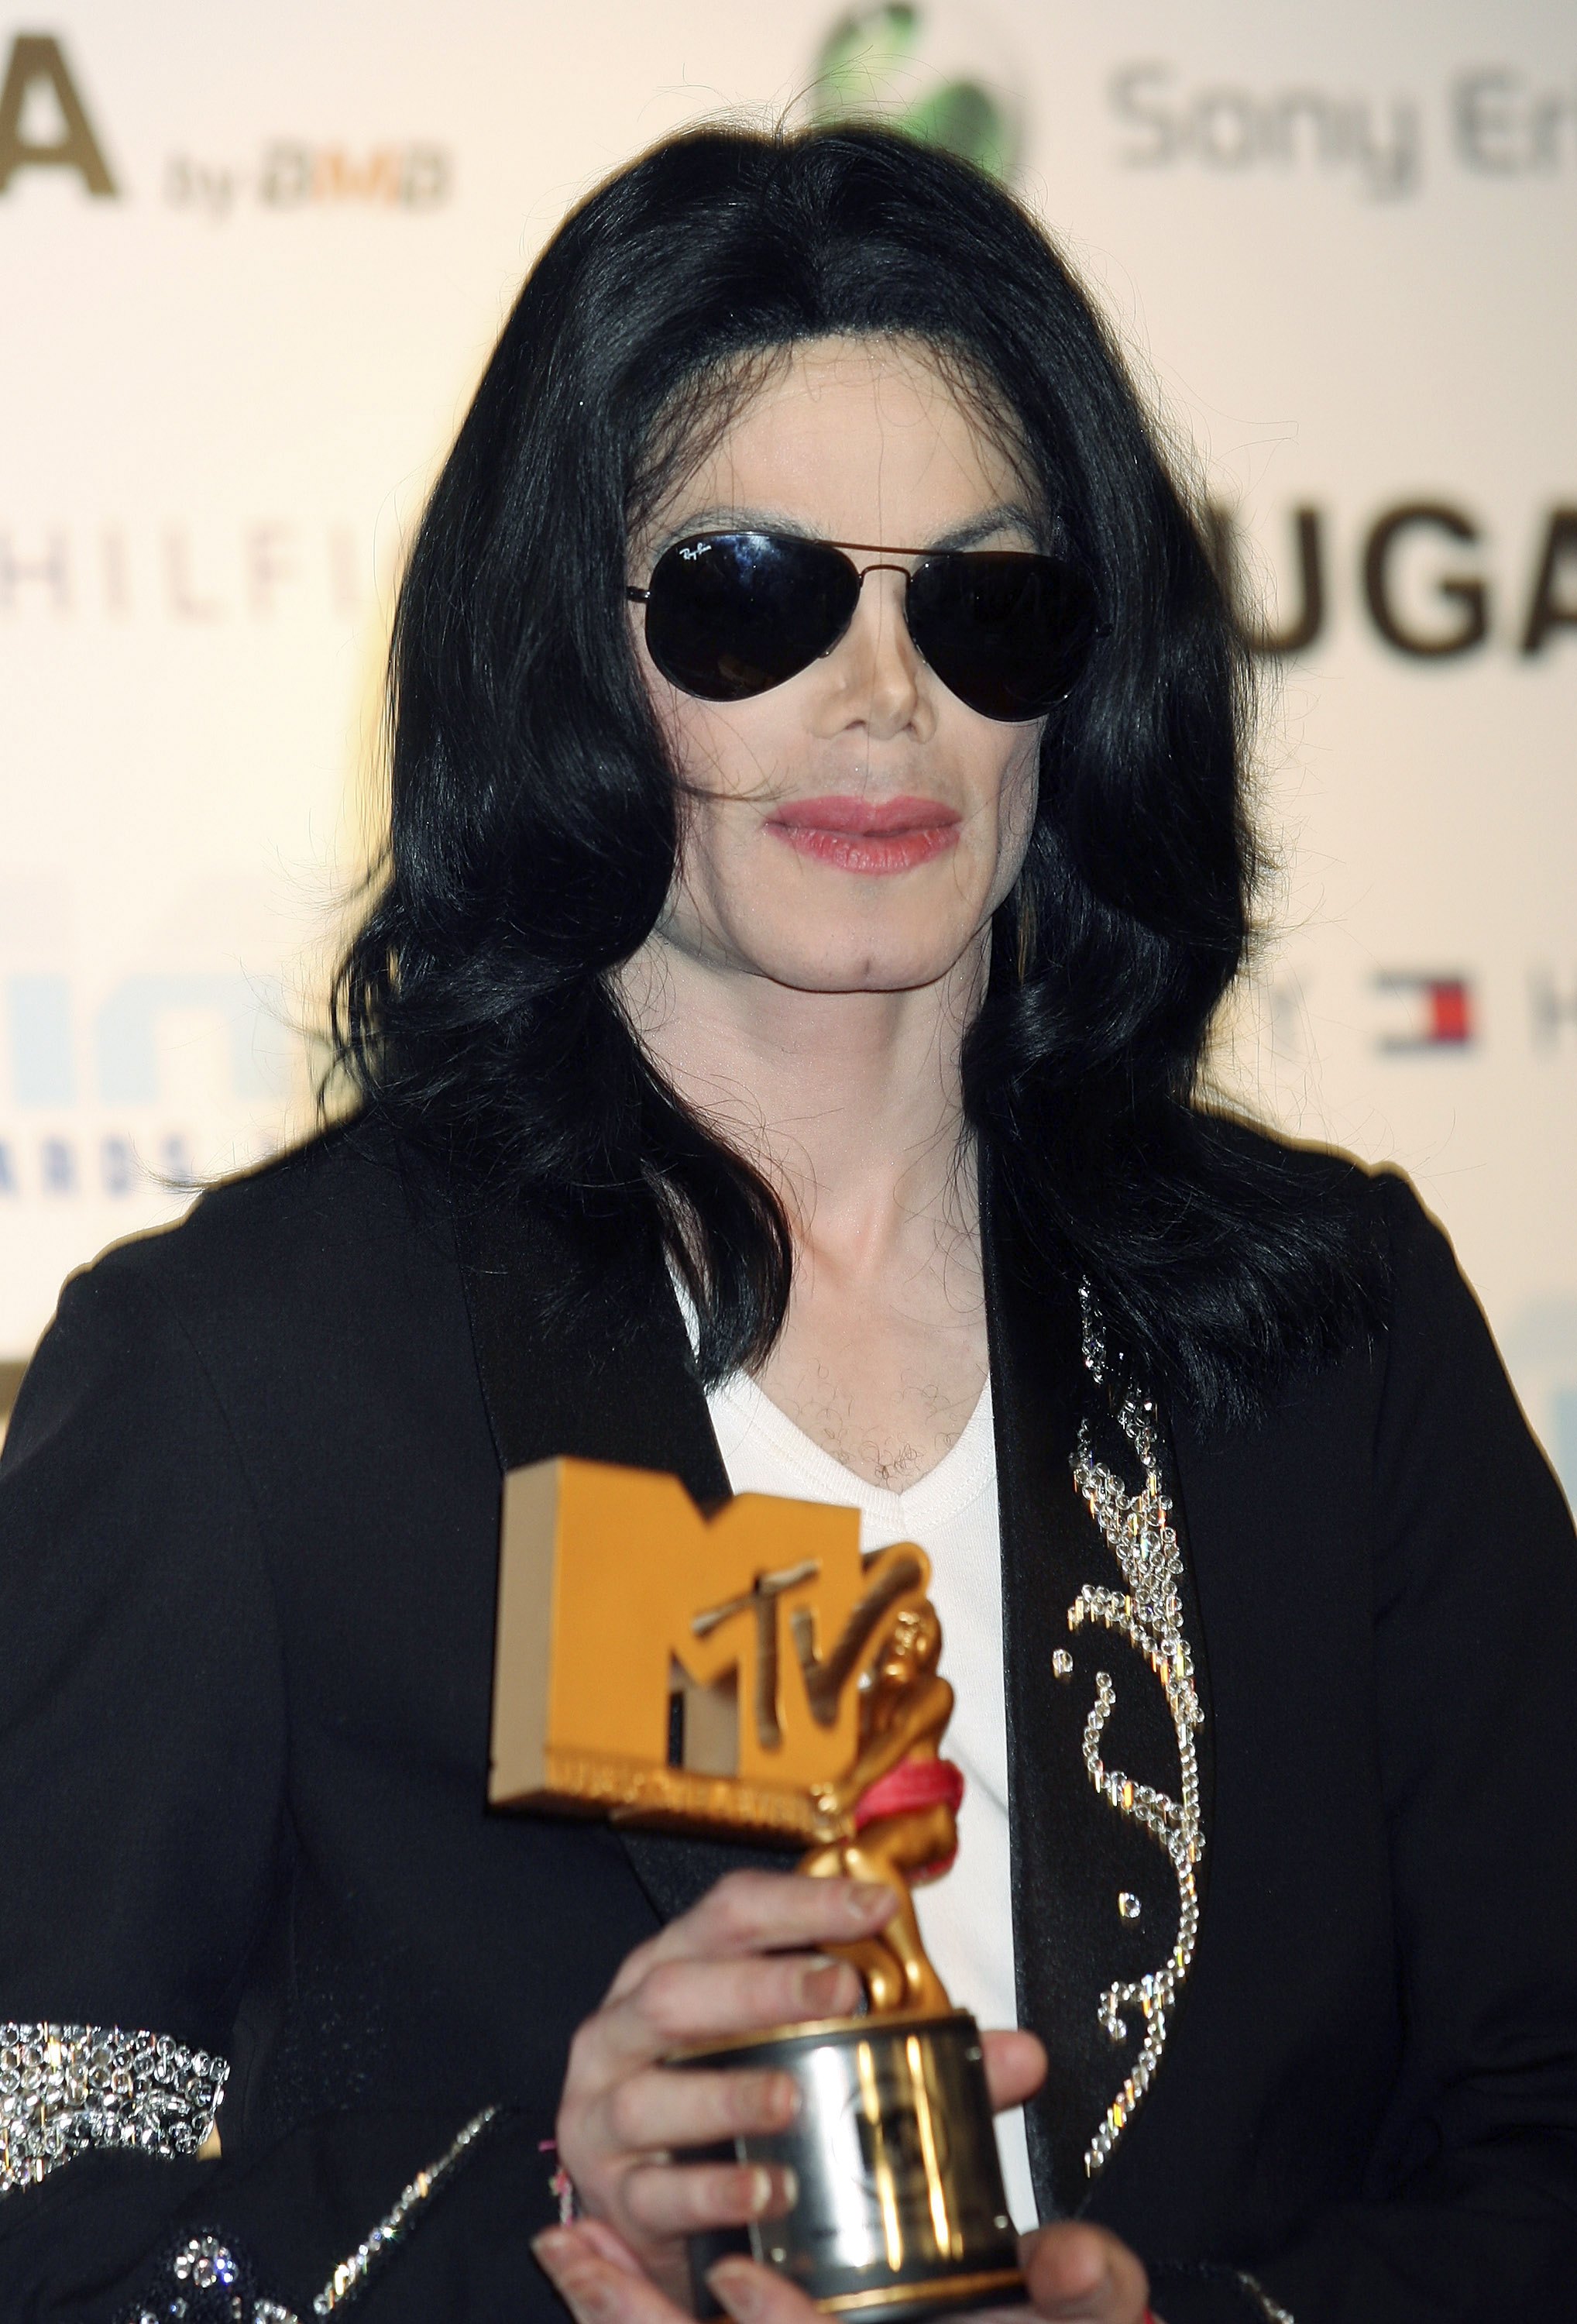 Michael Jackson photographed with his award MTV Video Music Awards in 2006 | Source: Getty Images